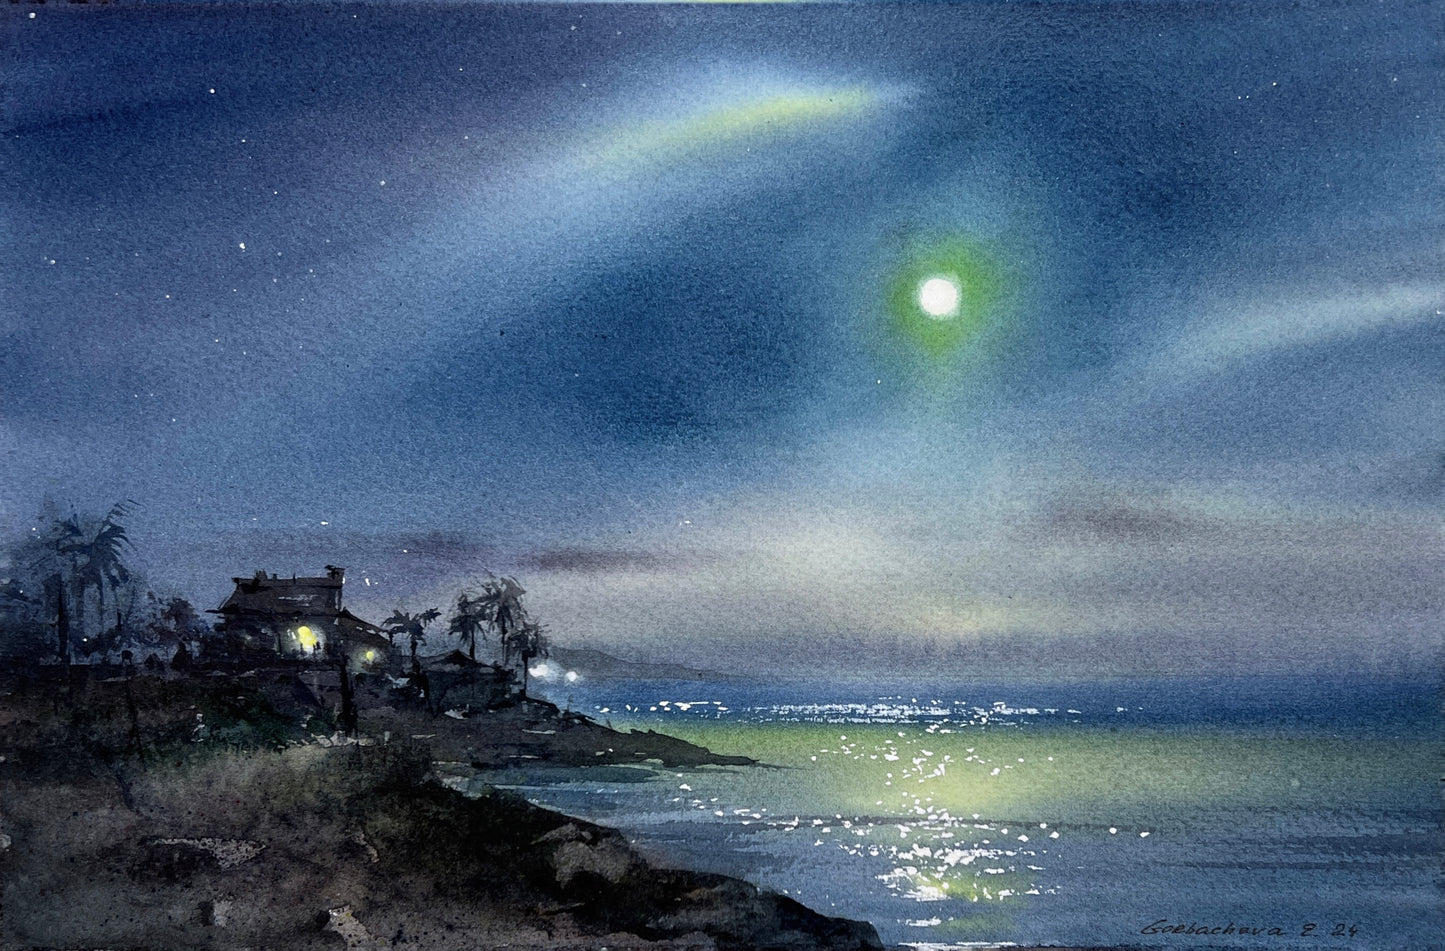 Watercolor Painting "In the Moonlight #11" - Moon Art Original, Celestial Night Sky 8x12, Ideal for Home Decor Gift